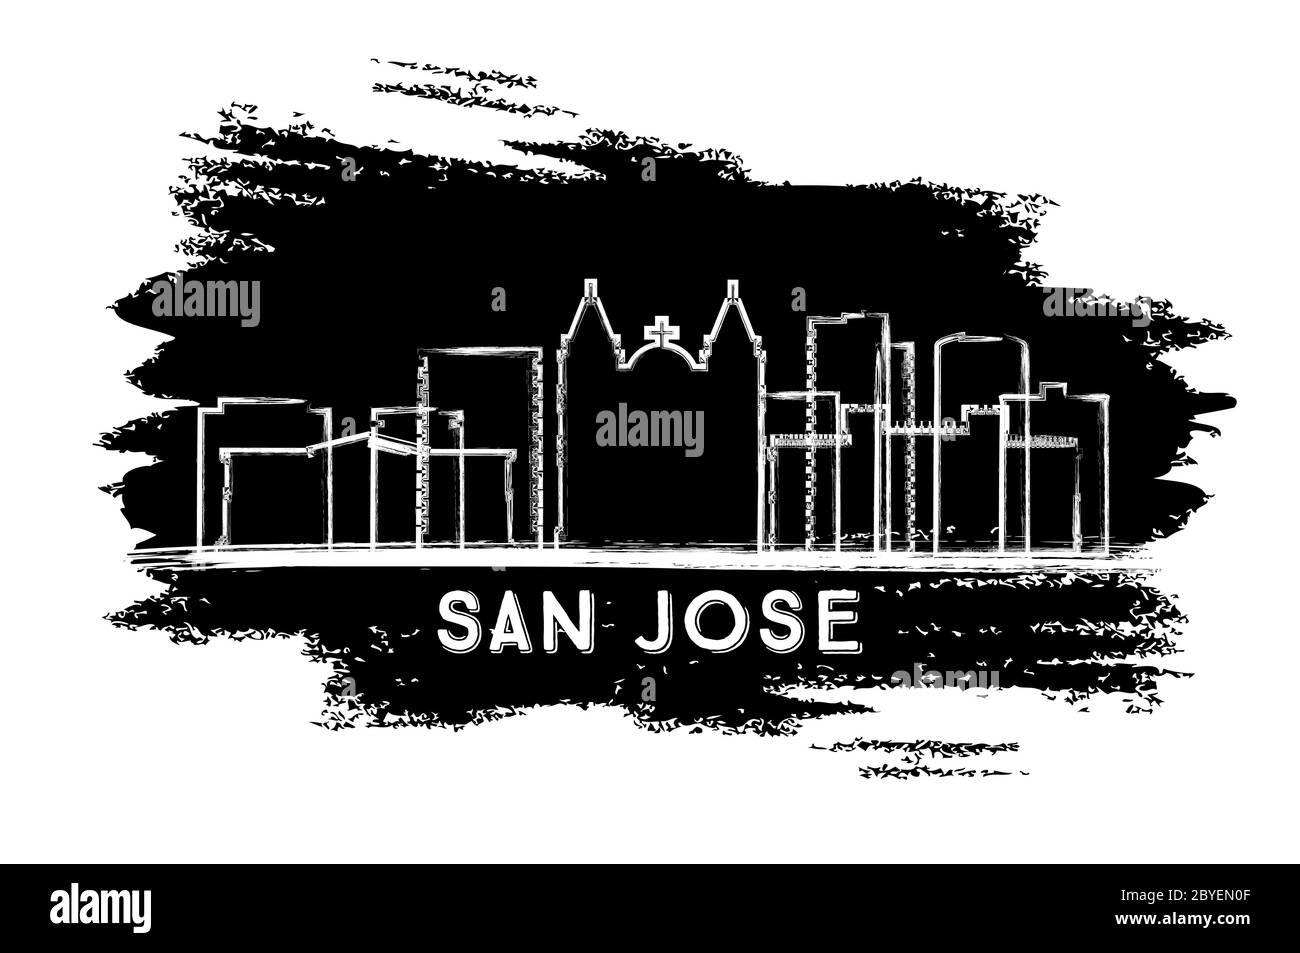 San Jose Costa Rica City Skyline Silhouette. Hand Drawn Sketch. Business Travel and Tourism Concept with Historic Architecture. Vector Illustration. Stock Vector